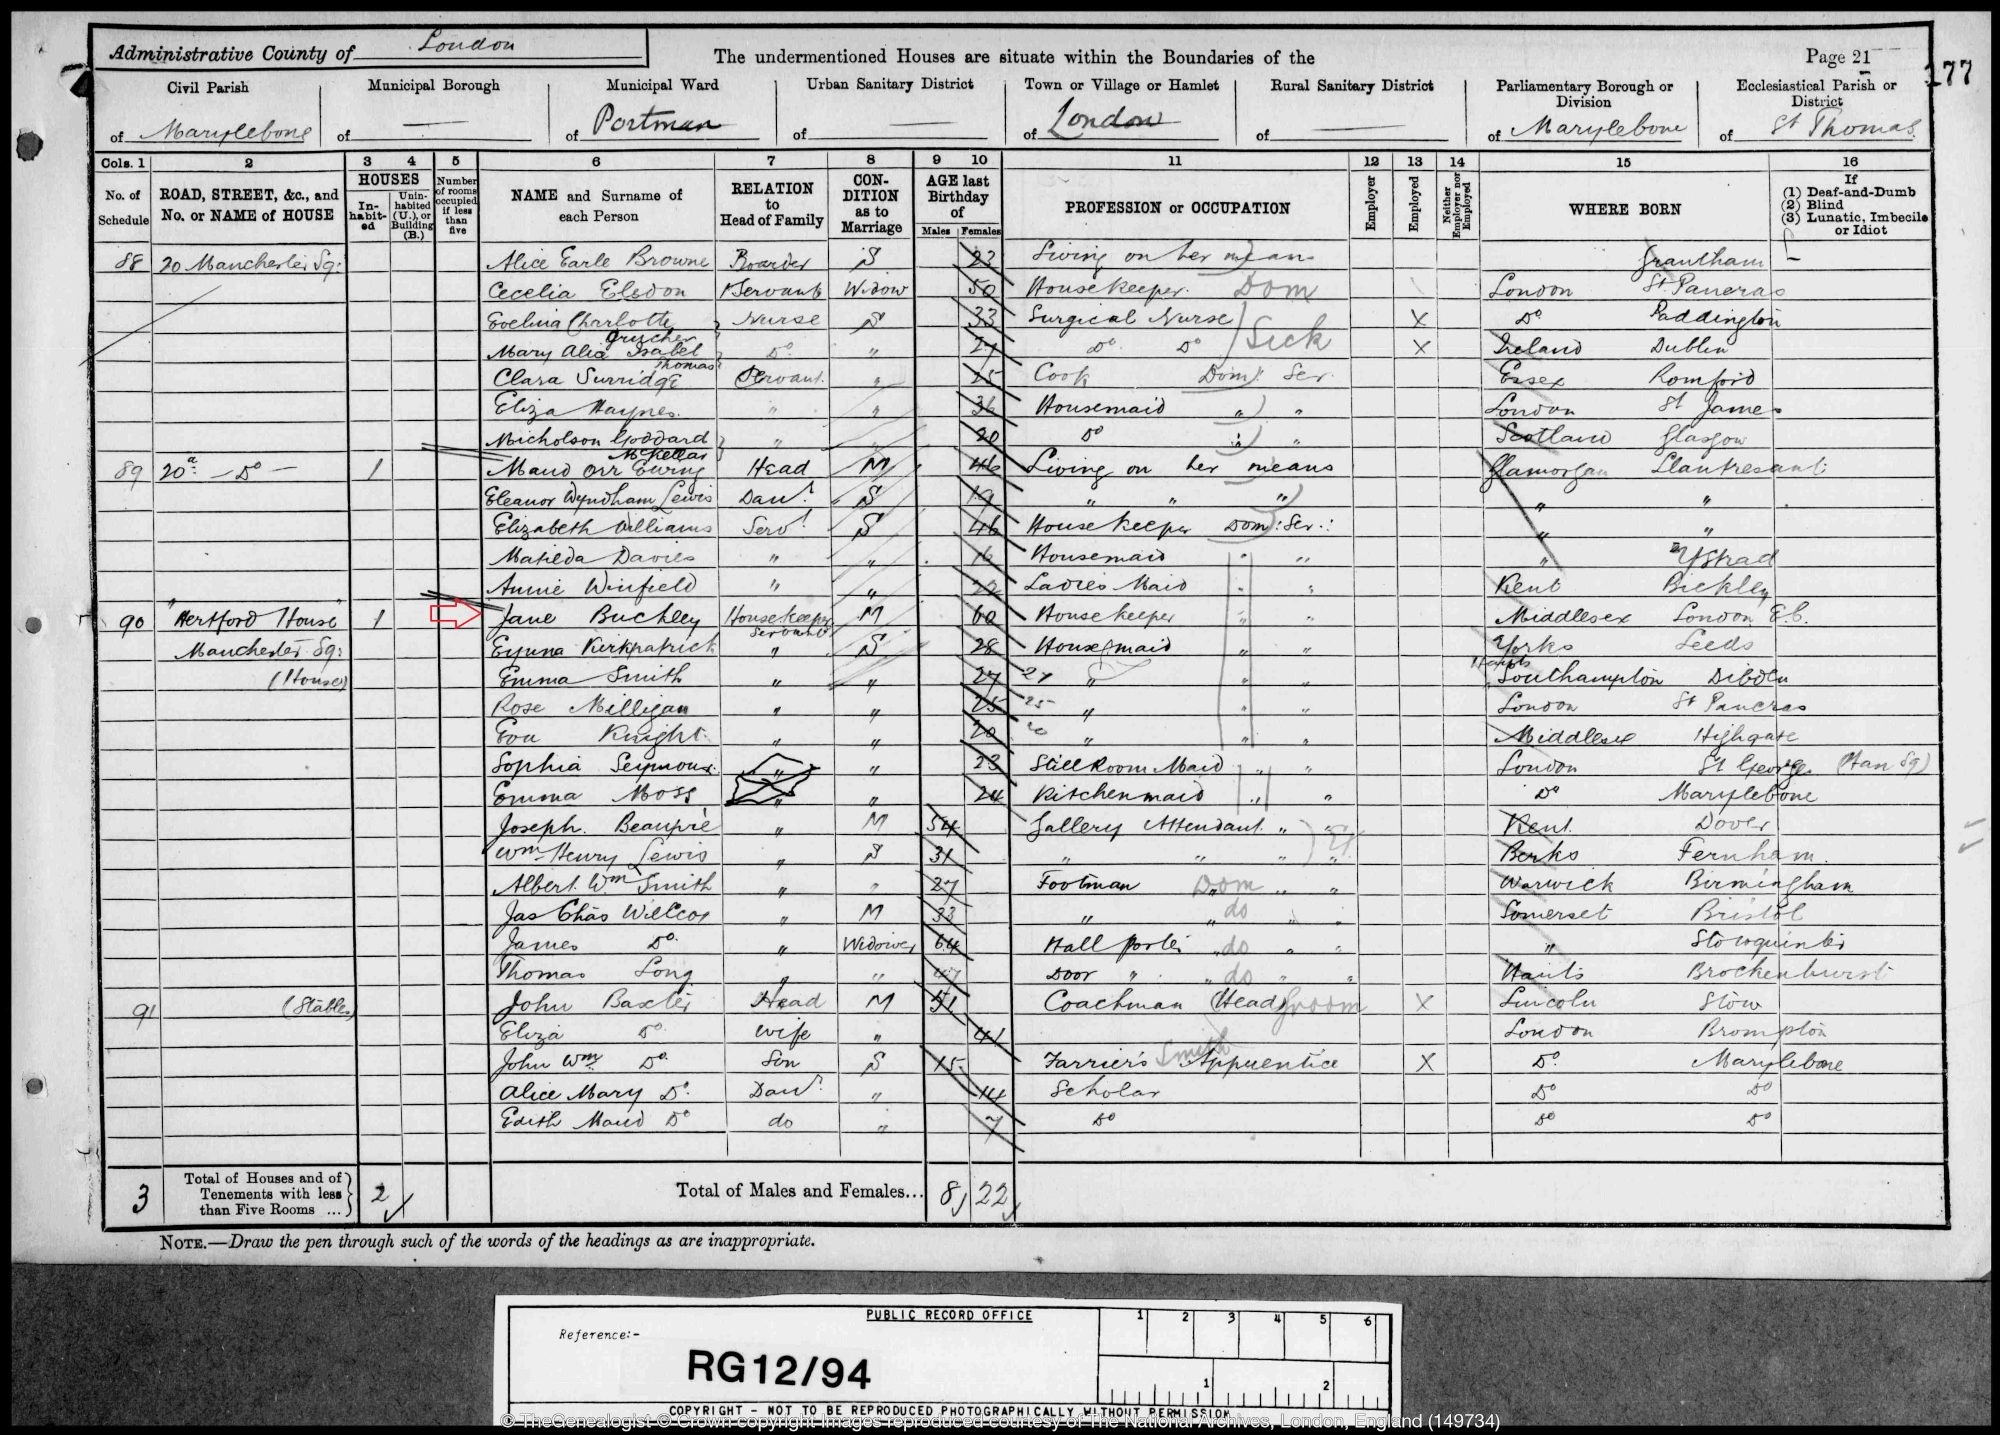 Jane Buckley, Housekeeper, recorded first in the absence of the Wallaces for the 1891 census